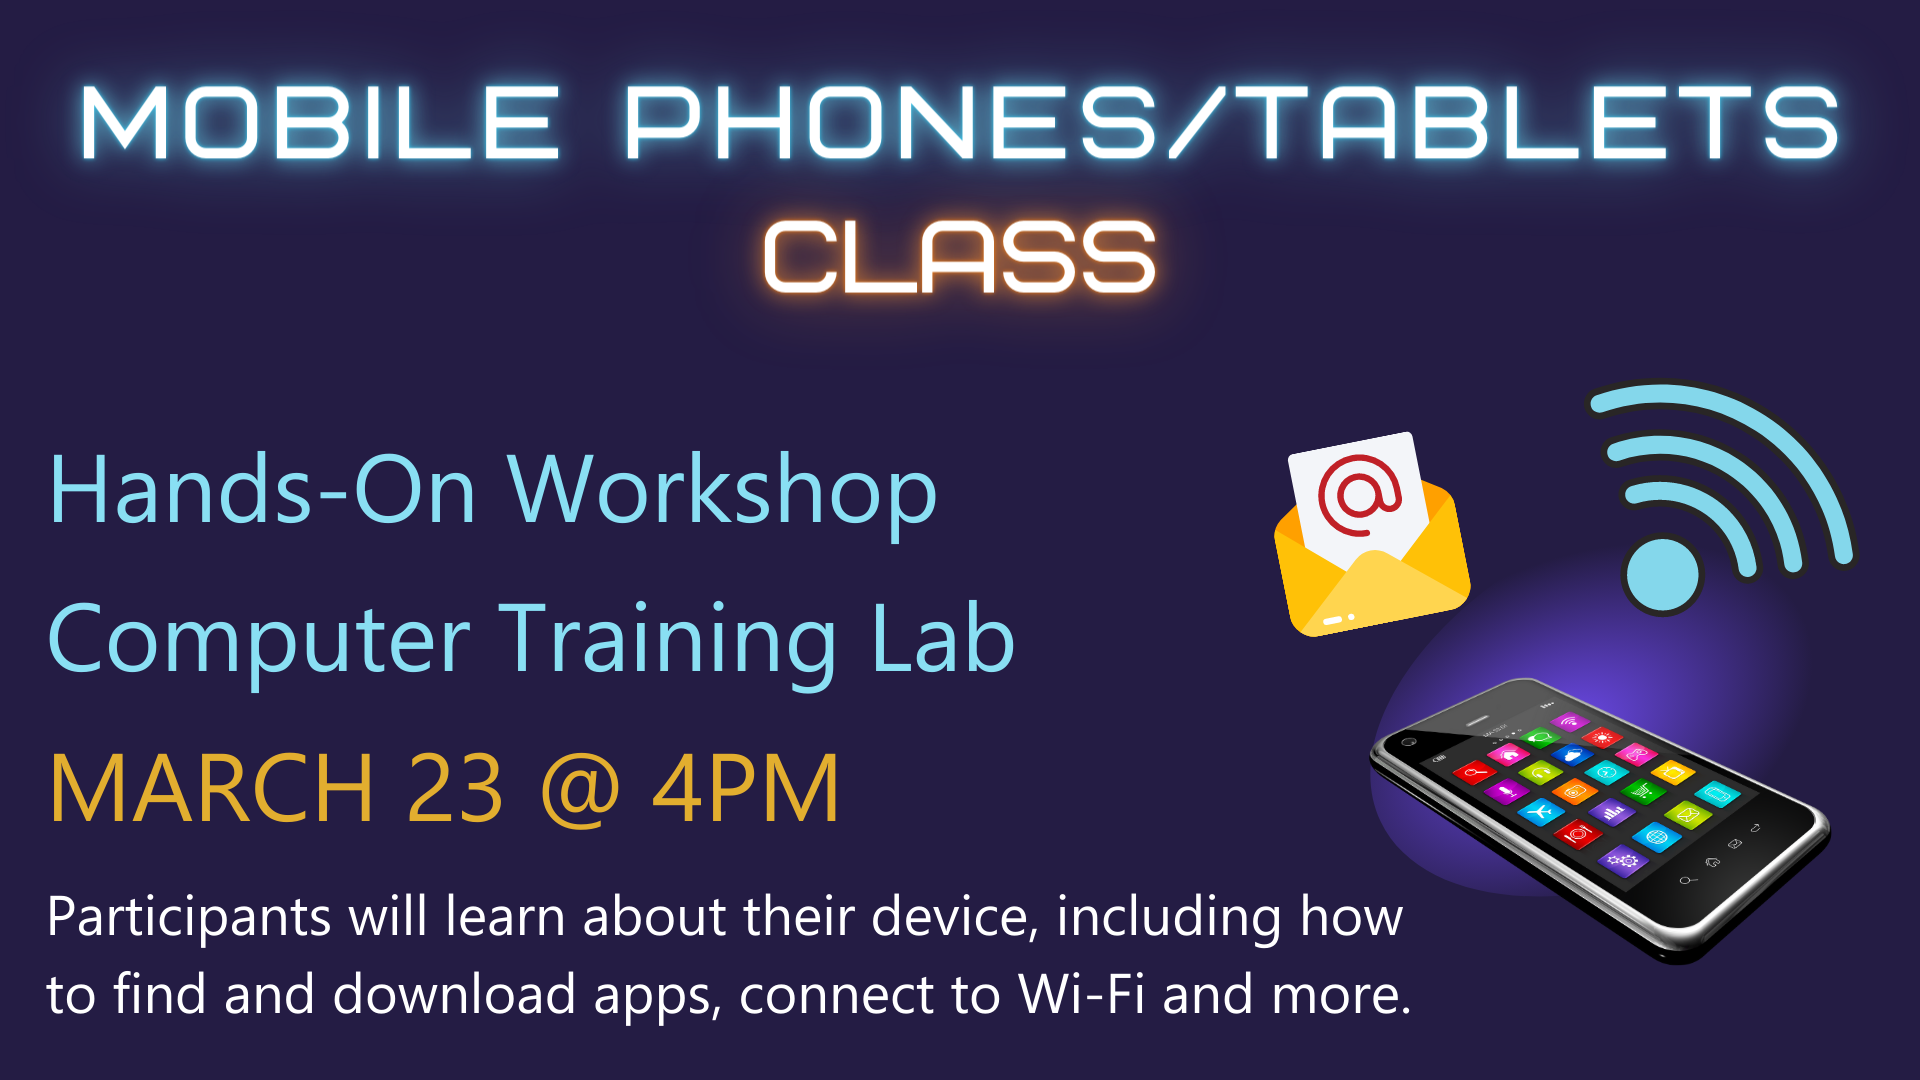 Participants will learn about their device, including how to find and download apps, connect to Wi-Fi and more.